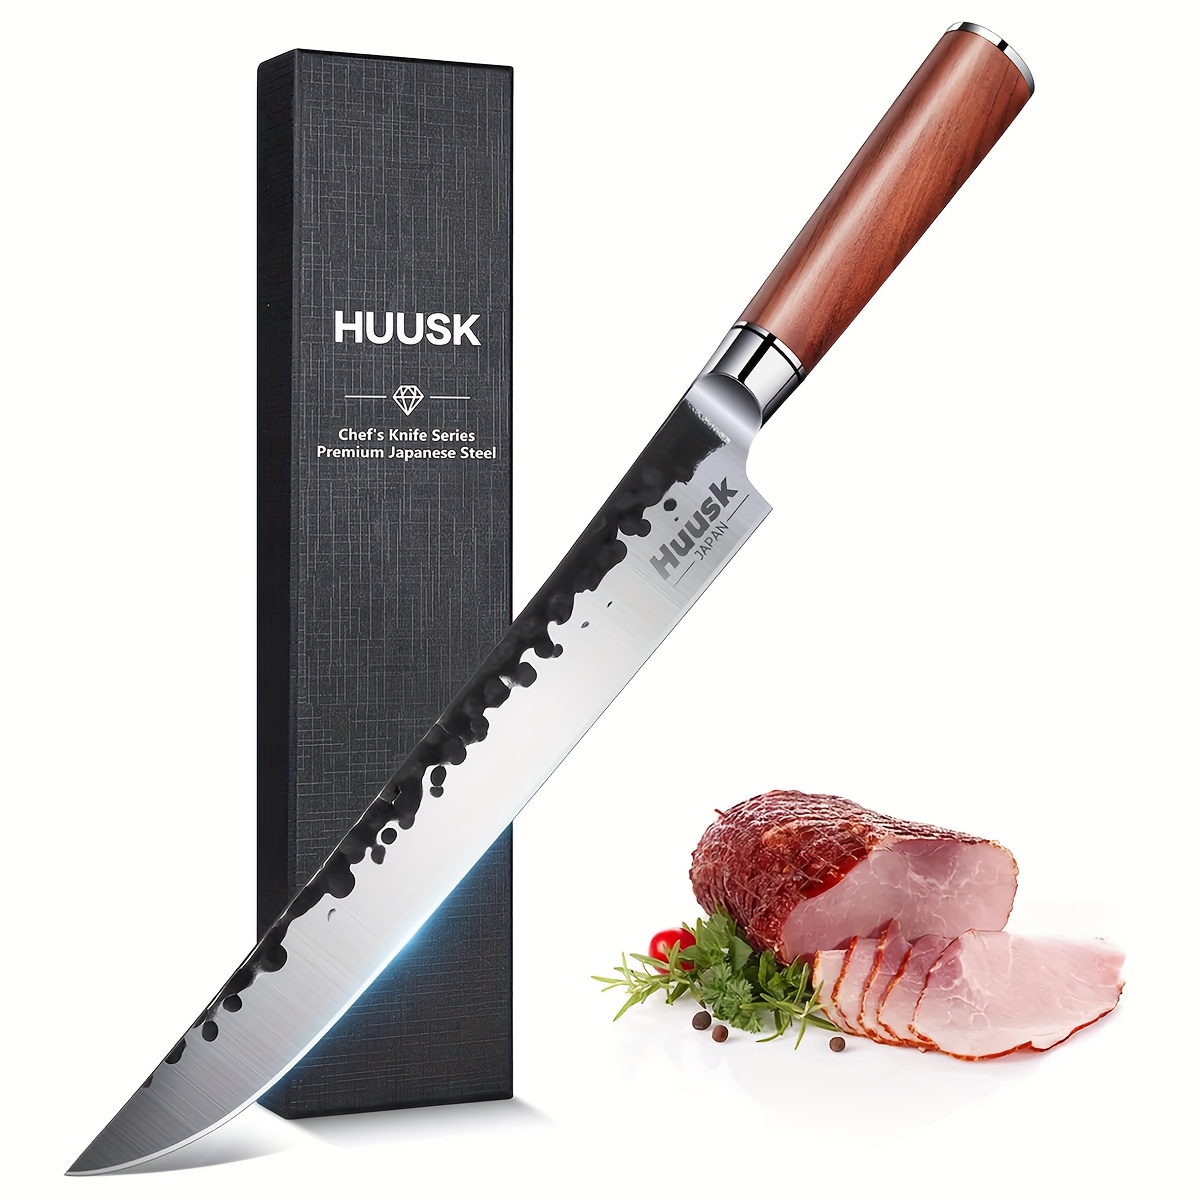 

Knives Japanese Brisket Slicing Knife, 10" Premium High-carbon Butcher Breaking Knife Hand Forged Long Meat Trimming Carving Knife For Turkey Slicing Meat Rib Roast Bbq Christmas Gifts